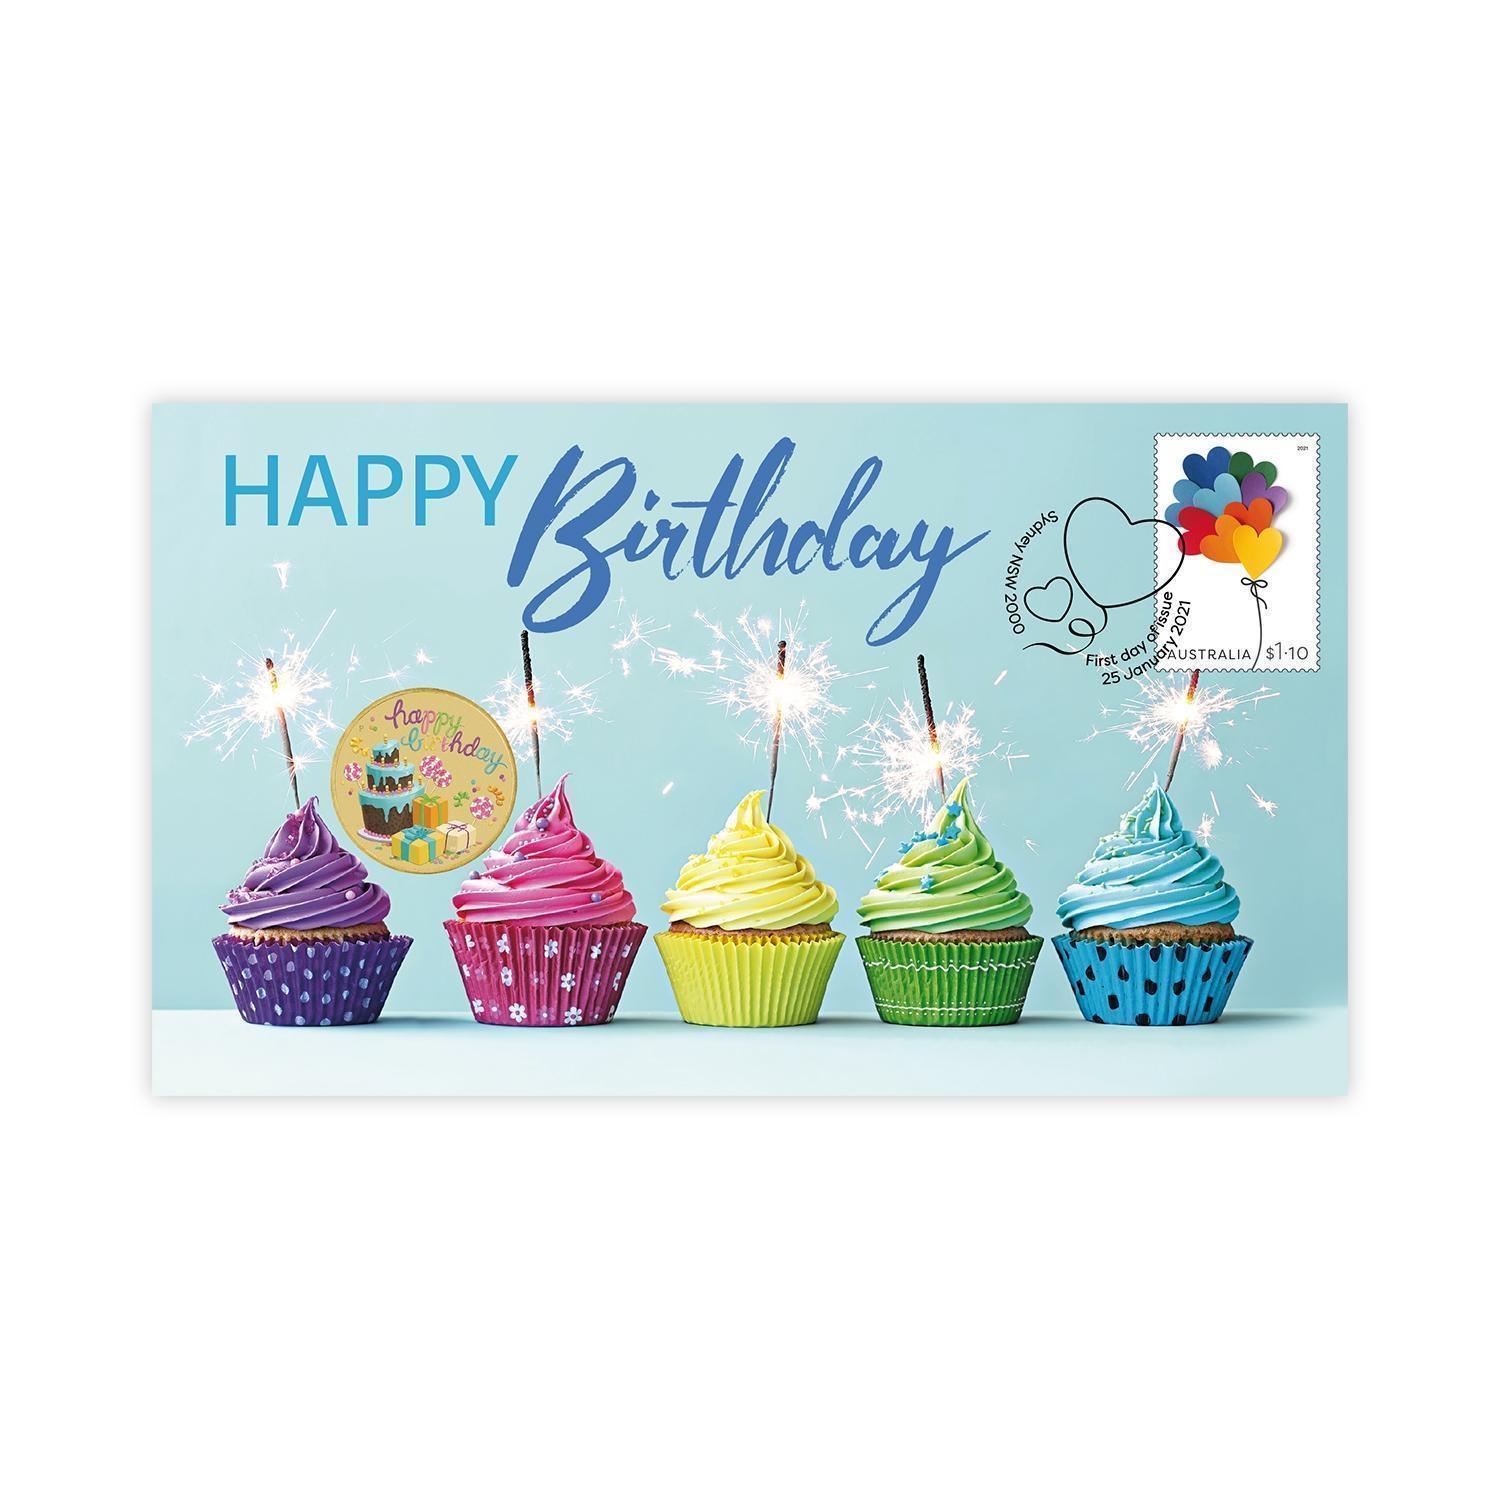 2021 $1 Happy Birthday Memorable Moments Stamp & Coin Cover PNC